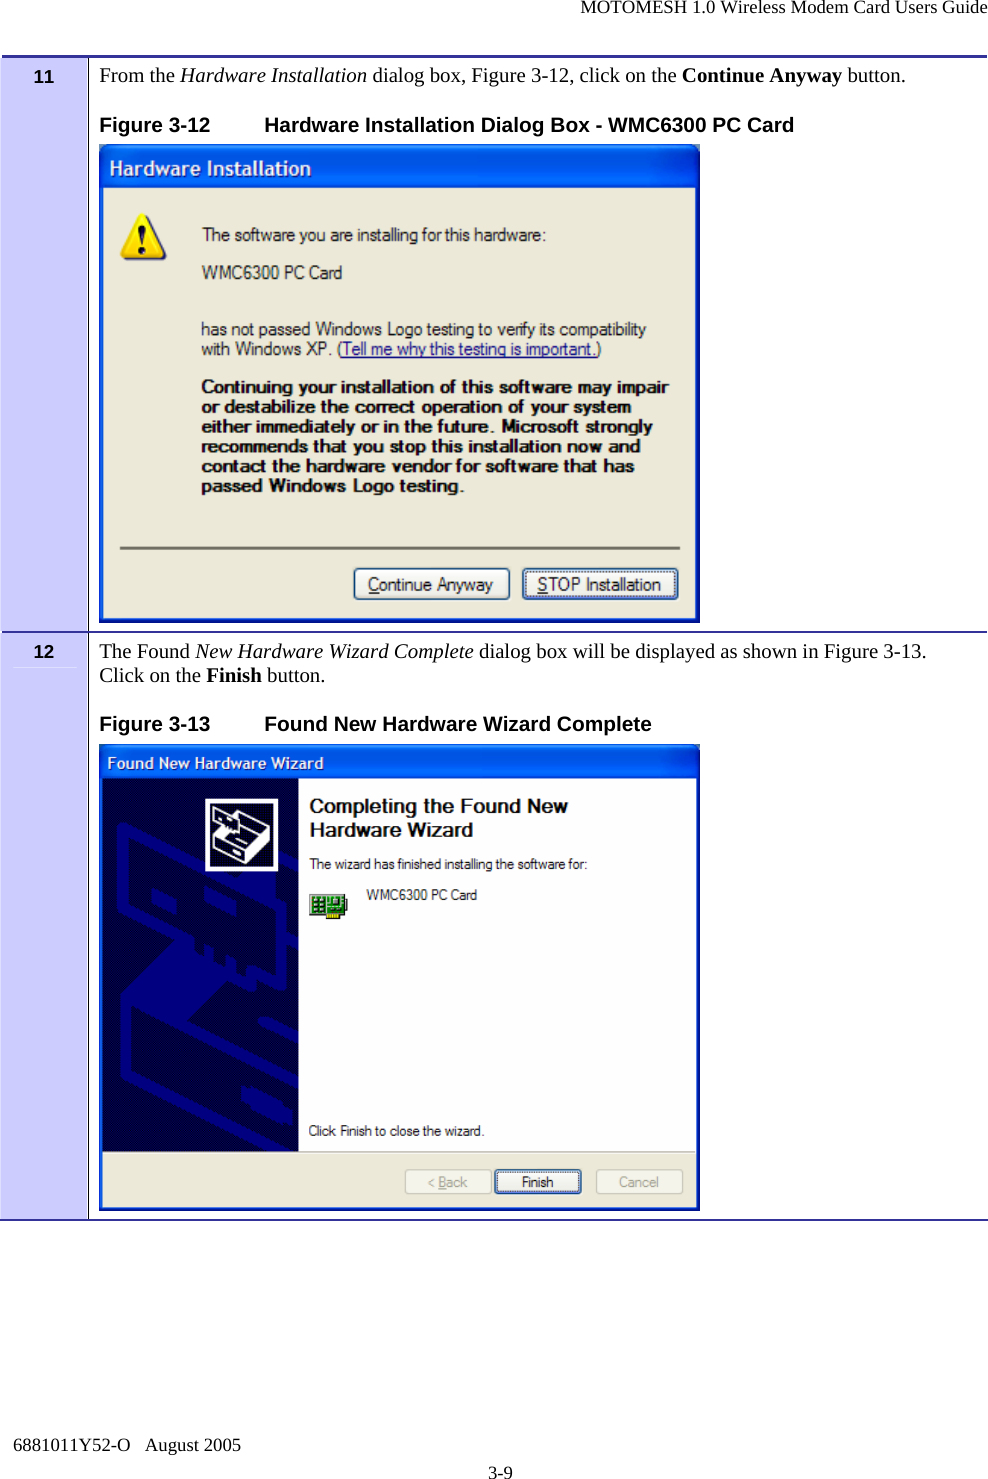 MOTOMESH 1.0 Wireless Modem Card Users Guide 6881011Y52-O   August 2005 3-9 11  From the Hardware Installation dialog box, Figure 3-12, click on the Continue Anyway button. Figure 3-12  Hardware Installation Dialog Box - WMC6300 PC Card  12  The Found New Hardware Wizard Complete dialog box will be displayed as shown in Figure 3-13.  Click on the Finish button. Figure 3-13  Found New Hardware Wizard Complete  